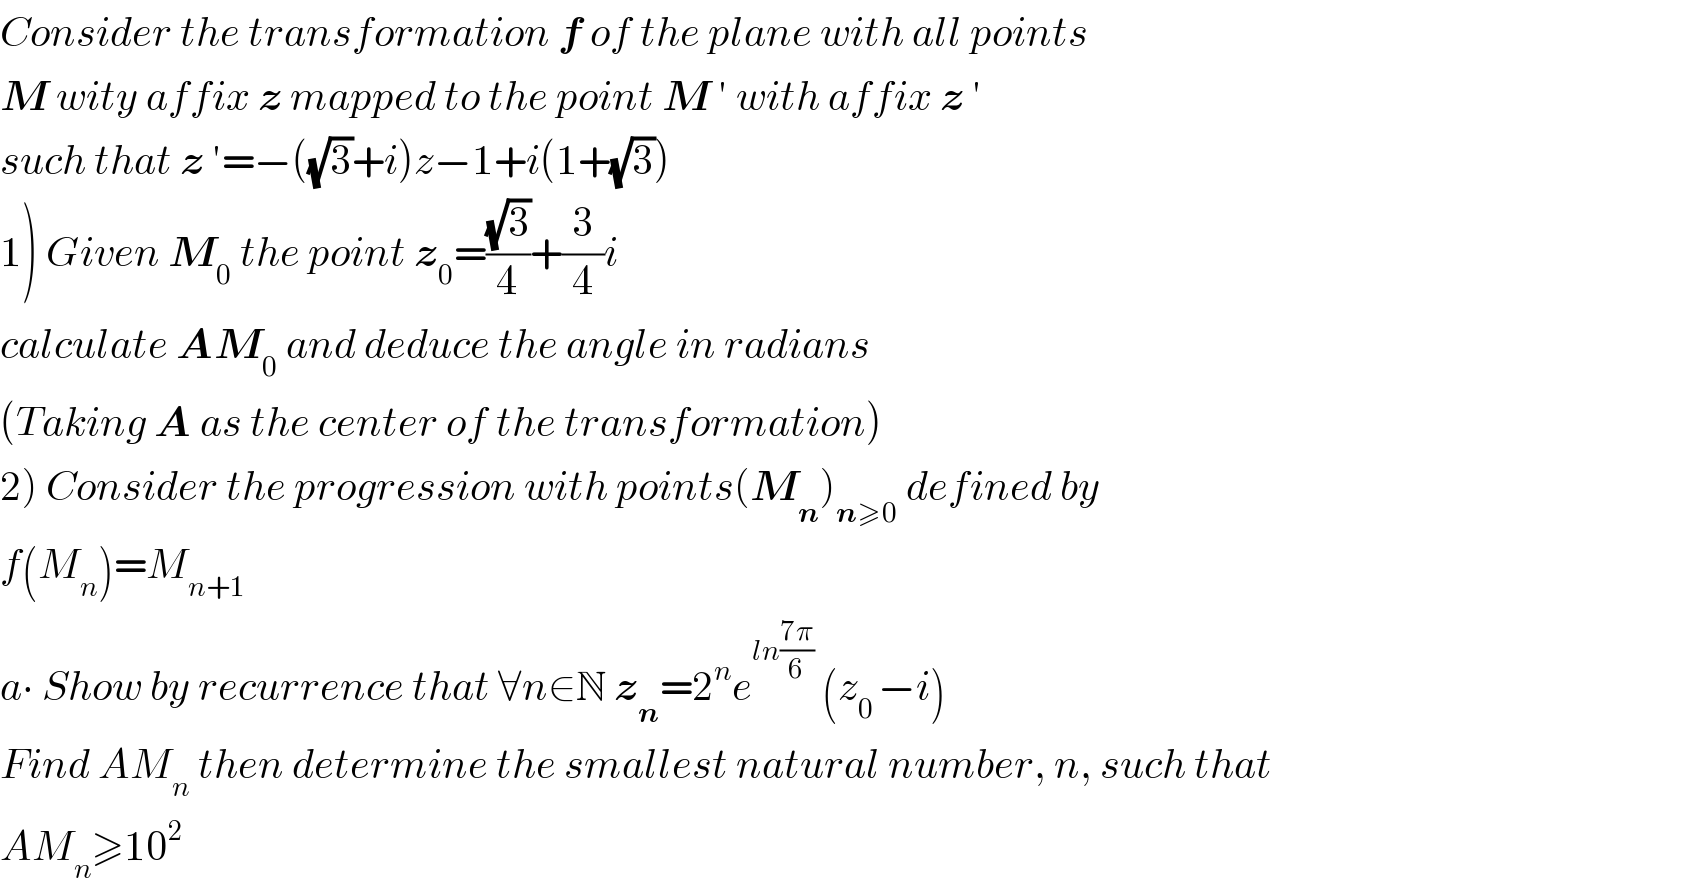 Consider the transformation f of the plane with all points  M wity affix z mapped to the point M ′ with affix z ′  such that z ′=−((√3)+i)z−1+i(1+(√3))  1) Given M_0  the point z_0 =((√3)/4)+(3/4)i  calculate AM_0  and deduce the angle in radians  (Taking A as the center of the transformation)  2) Consider the progression with points(M_n )_(n≥0)  defined by  f(M_n )=M_(n+1)   a∙ Show by recurrence that ∀n∈N z_n =2^n e^(ln((7π)/6))  (z_(0 ) −i)  Find AM_n  then determine the smallest natural number, n, such that  AM_n ≥10^2   